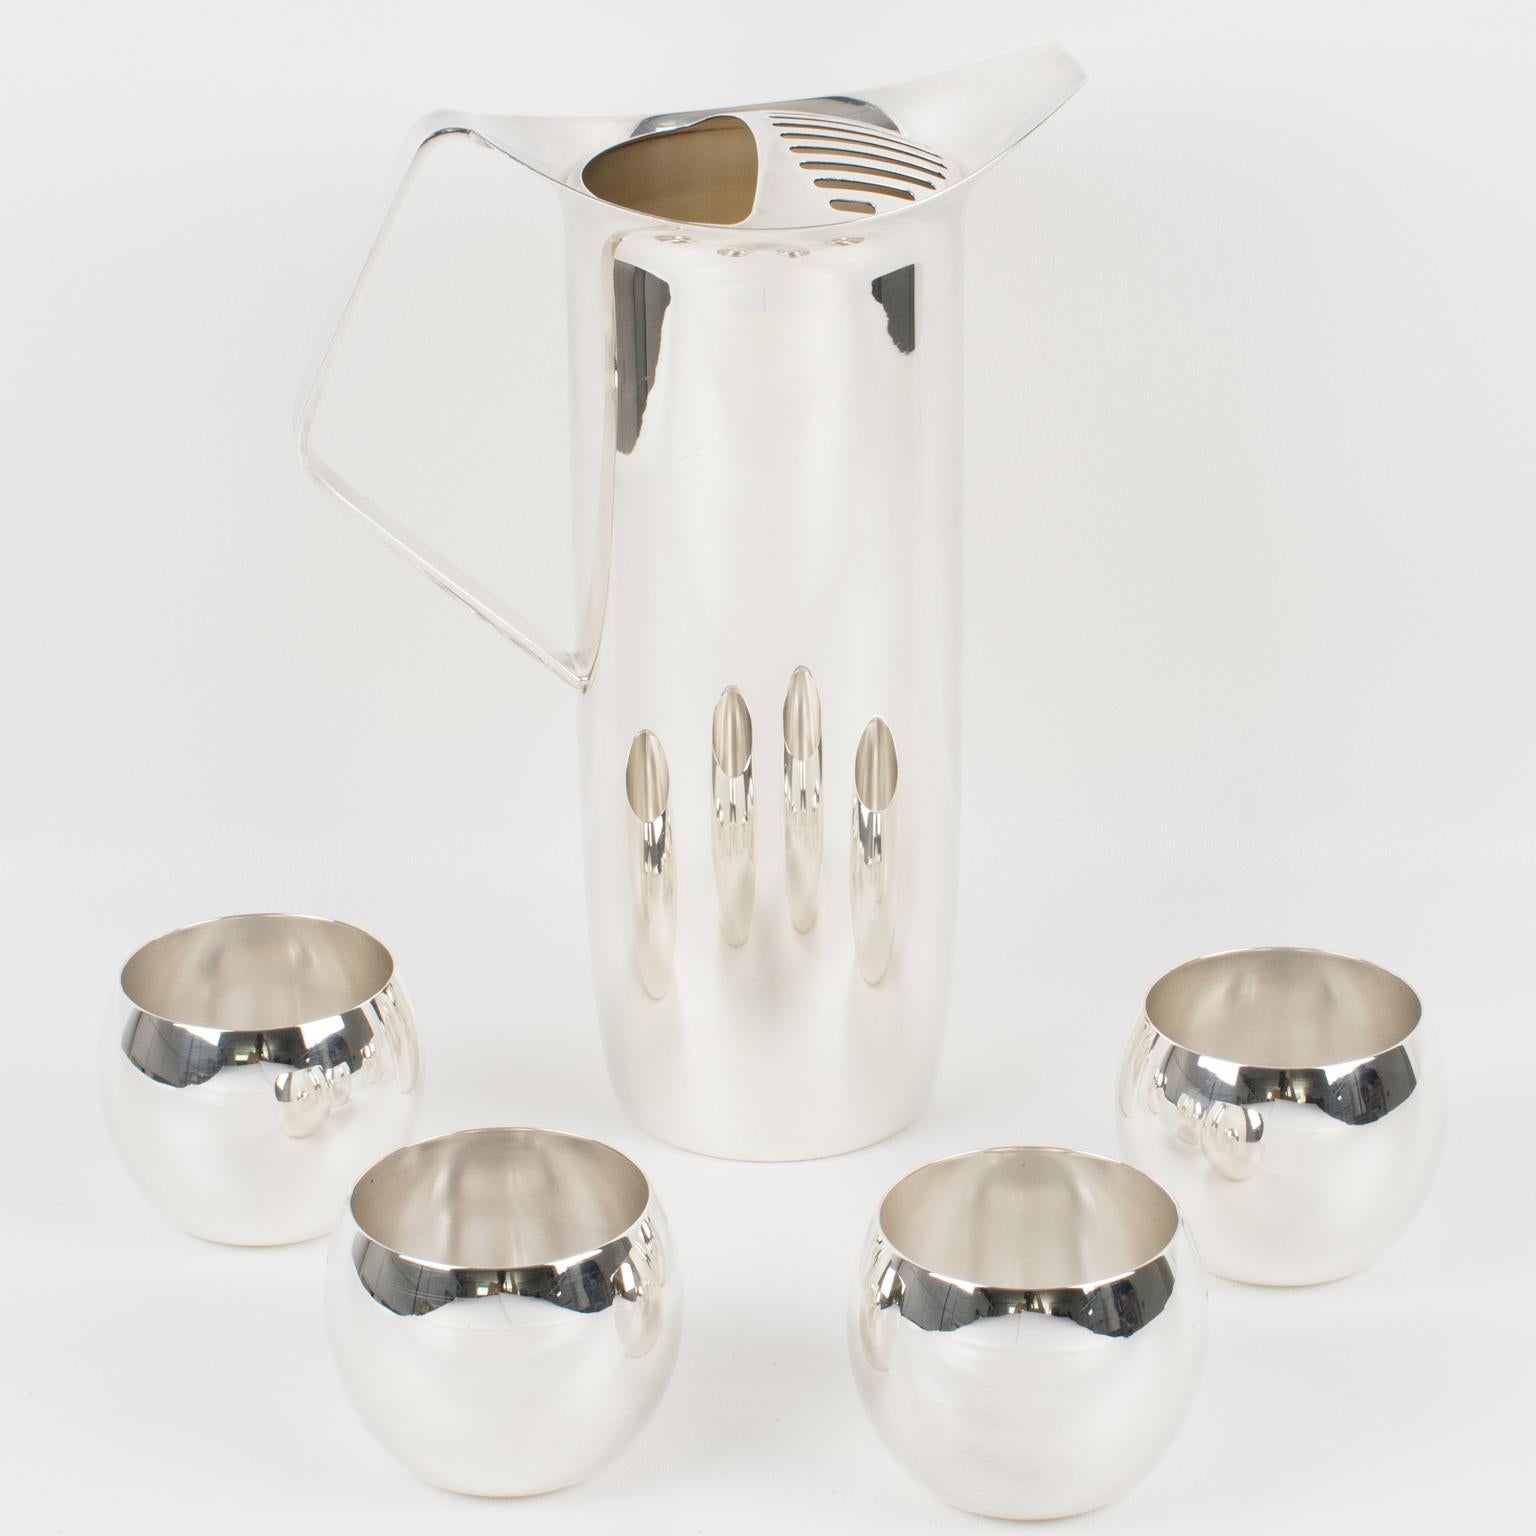 An elegant silver plate cocktail or Martini set designed by silversmith Towle, E.P. Germany. Sleek and modernist shape with a tall silver plate Martini pitcher or mixer jug with ice catcher. Four small silverplated glasses-cup finished the set for a